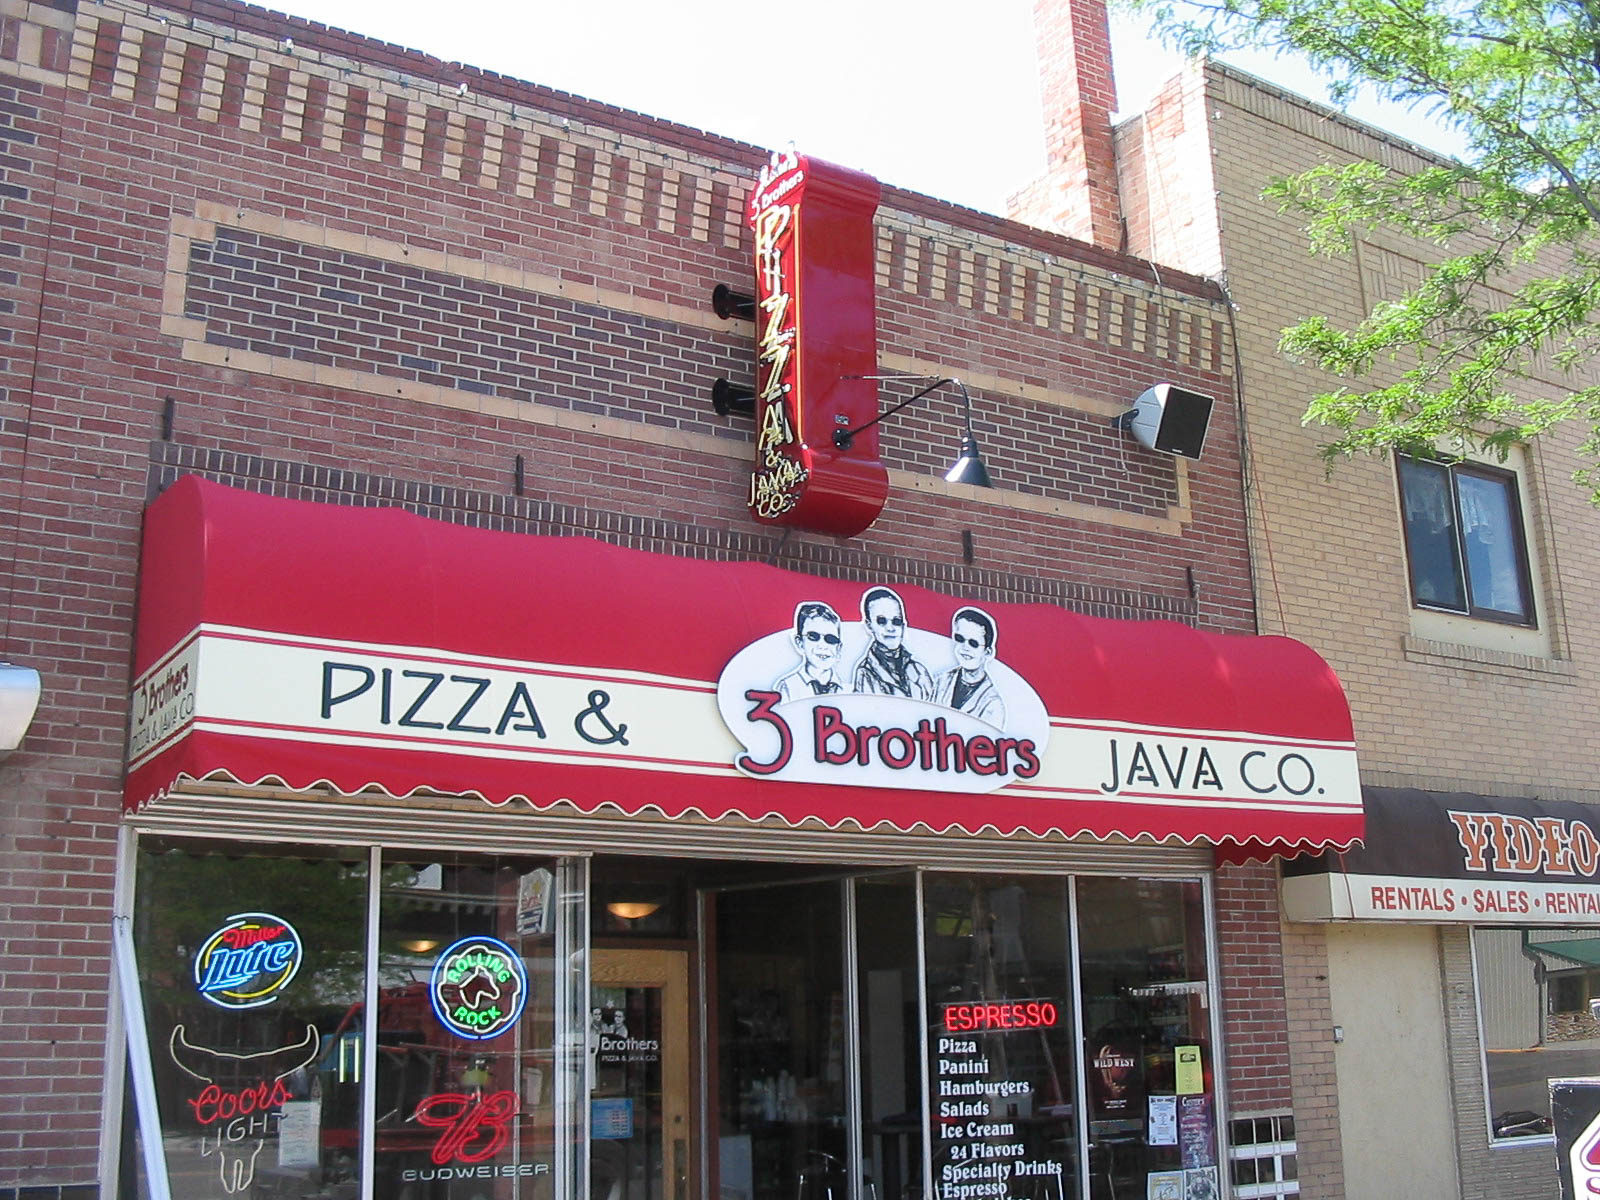 Awning for 3 Brothers Pizza & Java Co.